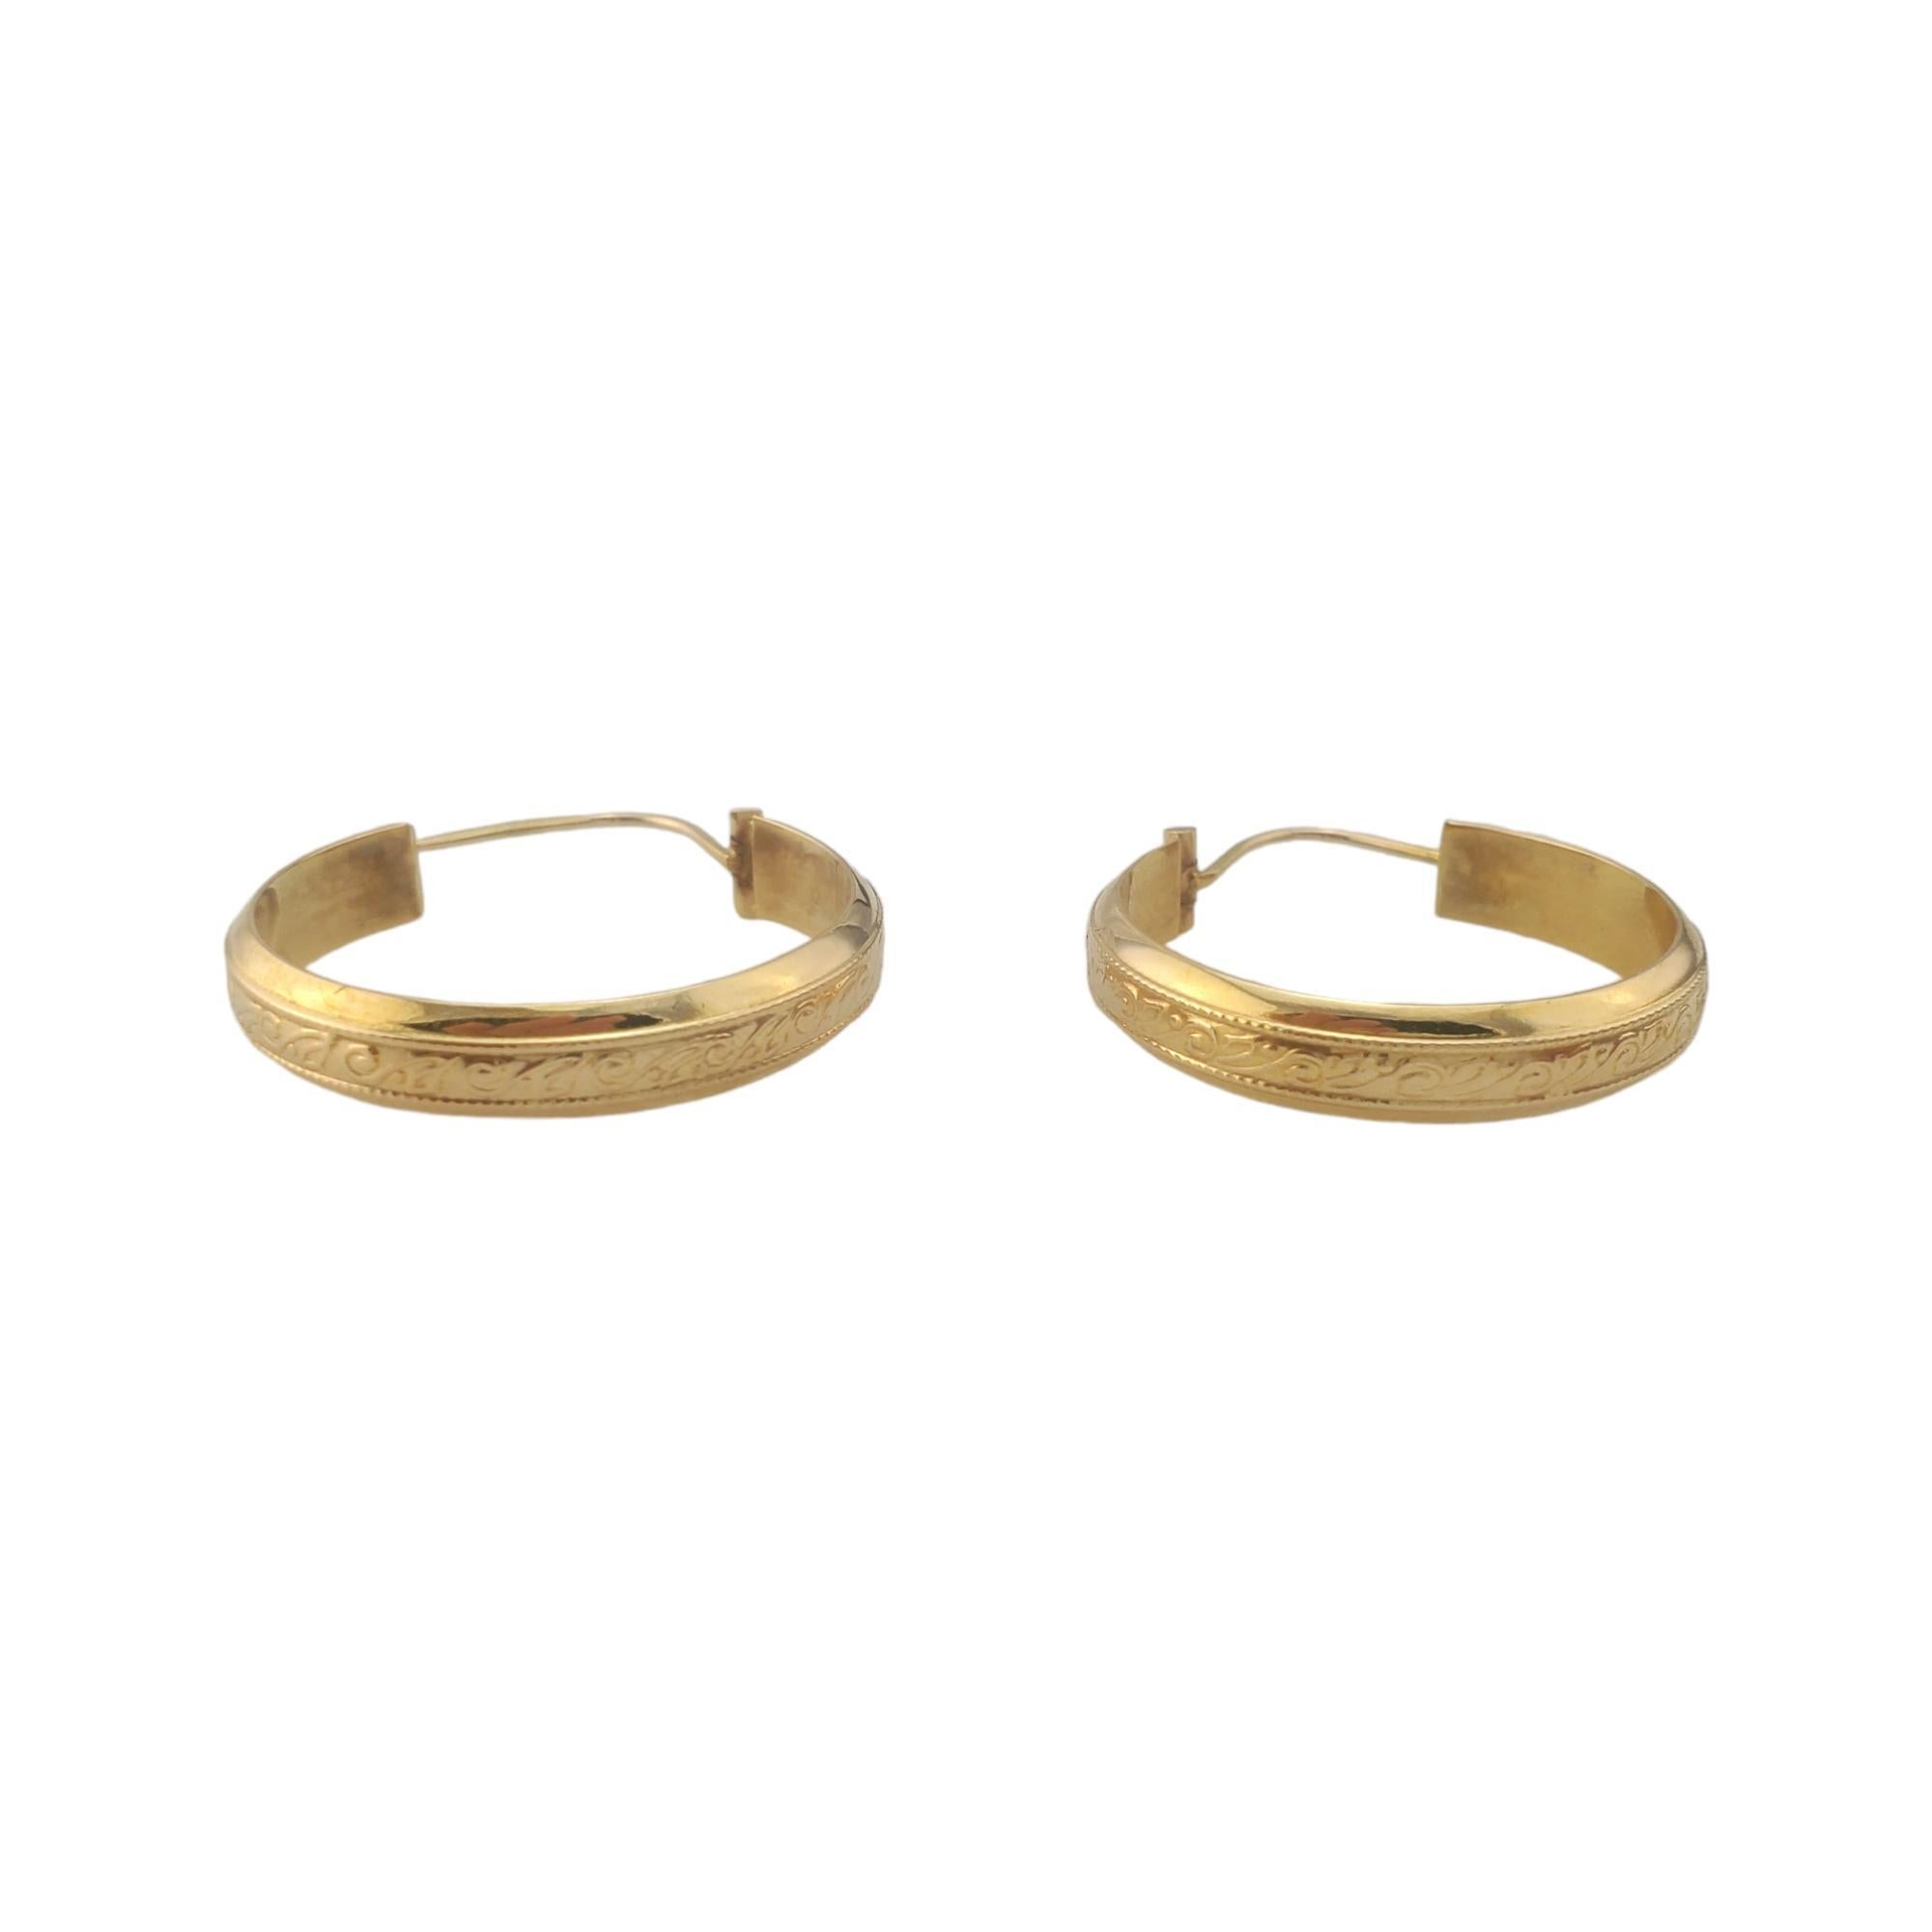 18K Yellow Gold Hoop Earrings with Scrolling Design

Elegant hoop earrings with vine design and v-lock closure in 18K yellow gold.

Hallmark: 750 AR

Weight: 3.4 g/ 2.2 dwt.

Size: 28.4 mm X 5.1 mm X 1.7 mm

Very good condition, professionally